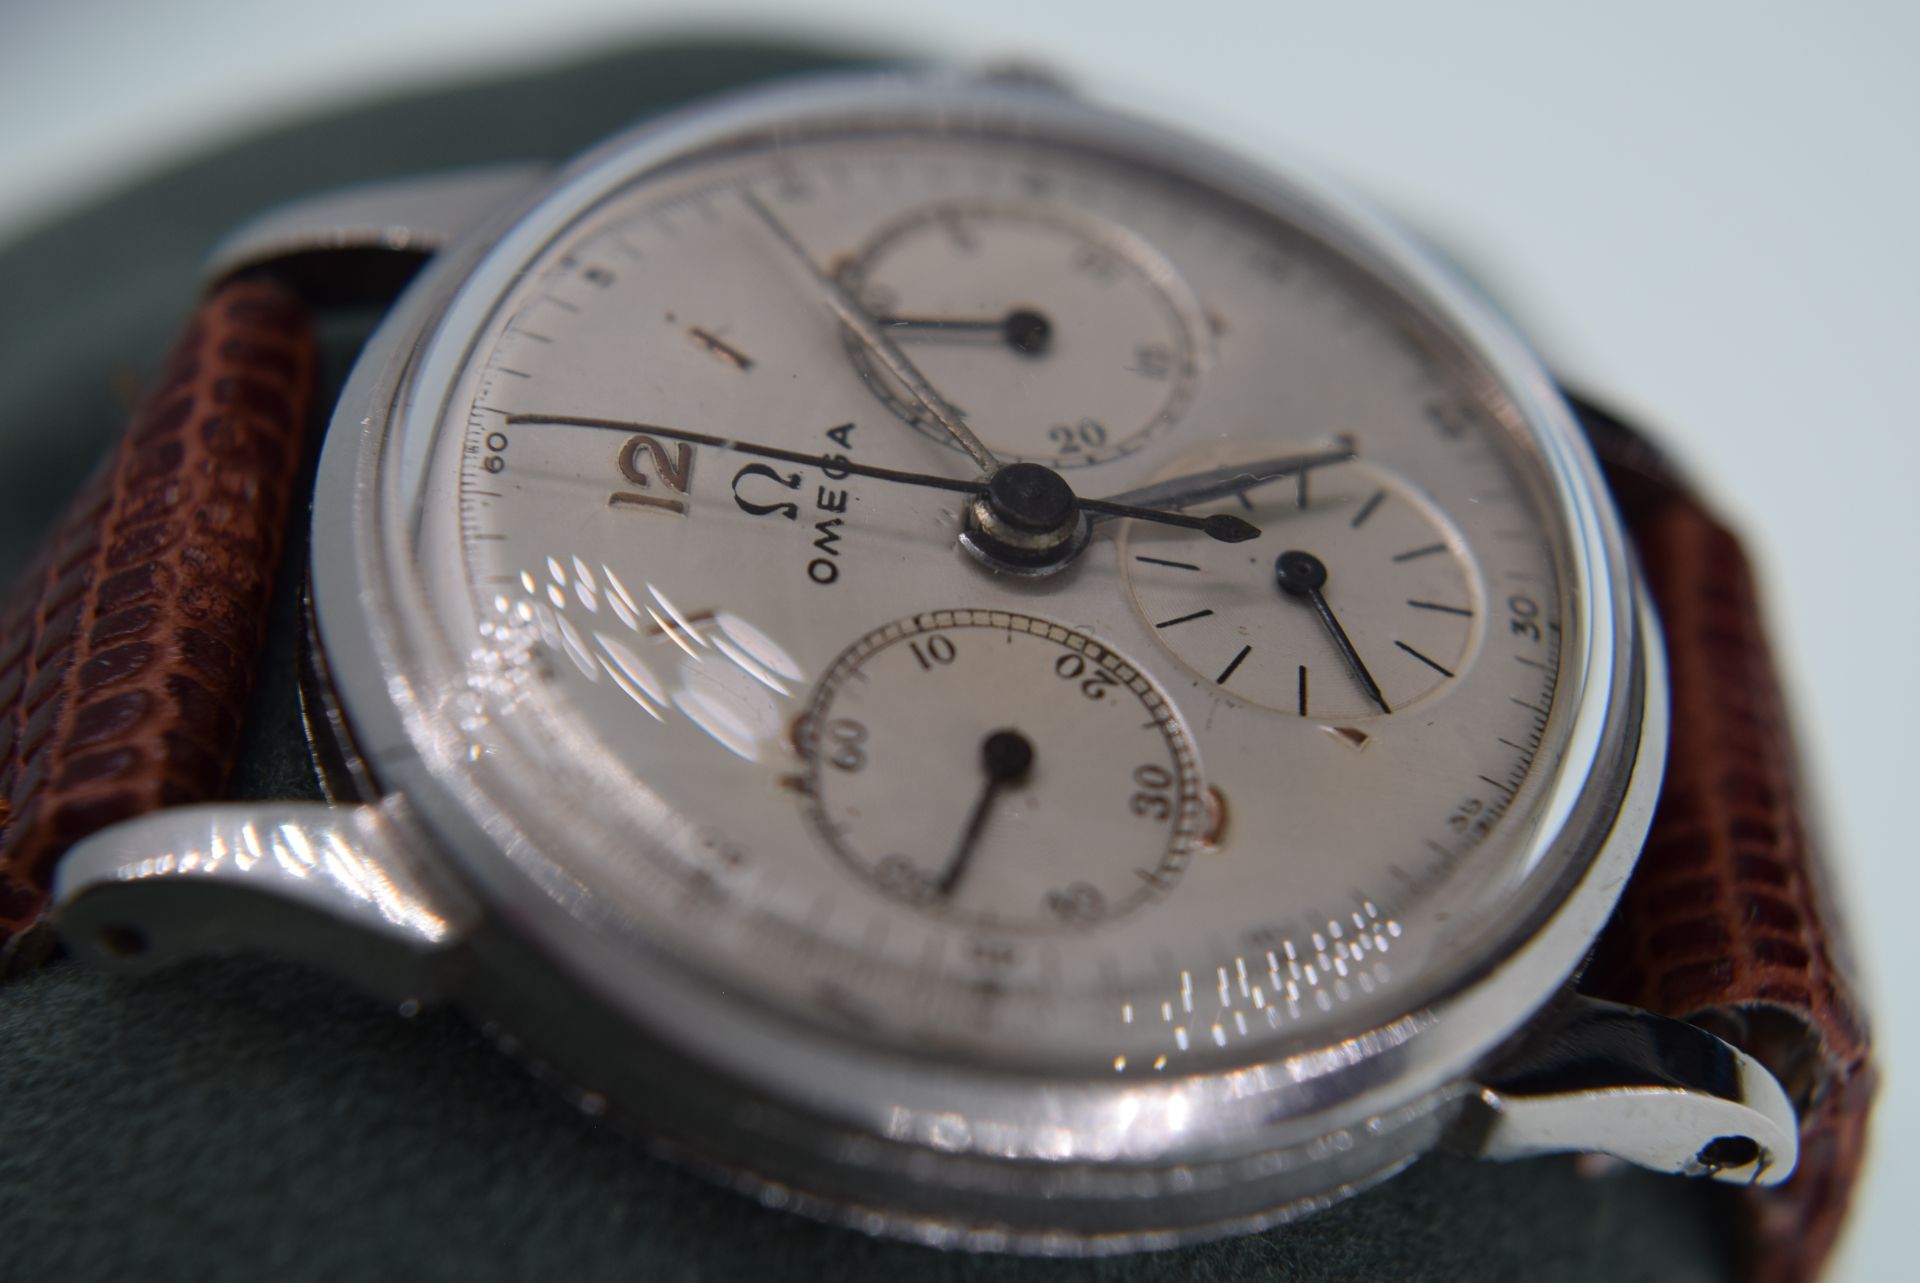 VINTAGE OMEGA WATCH WITH CHRONOGRAPH WITH OMEGA MANUAL WIND MOVEMENT - Image 3 of 5